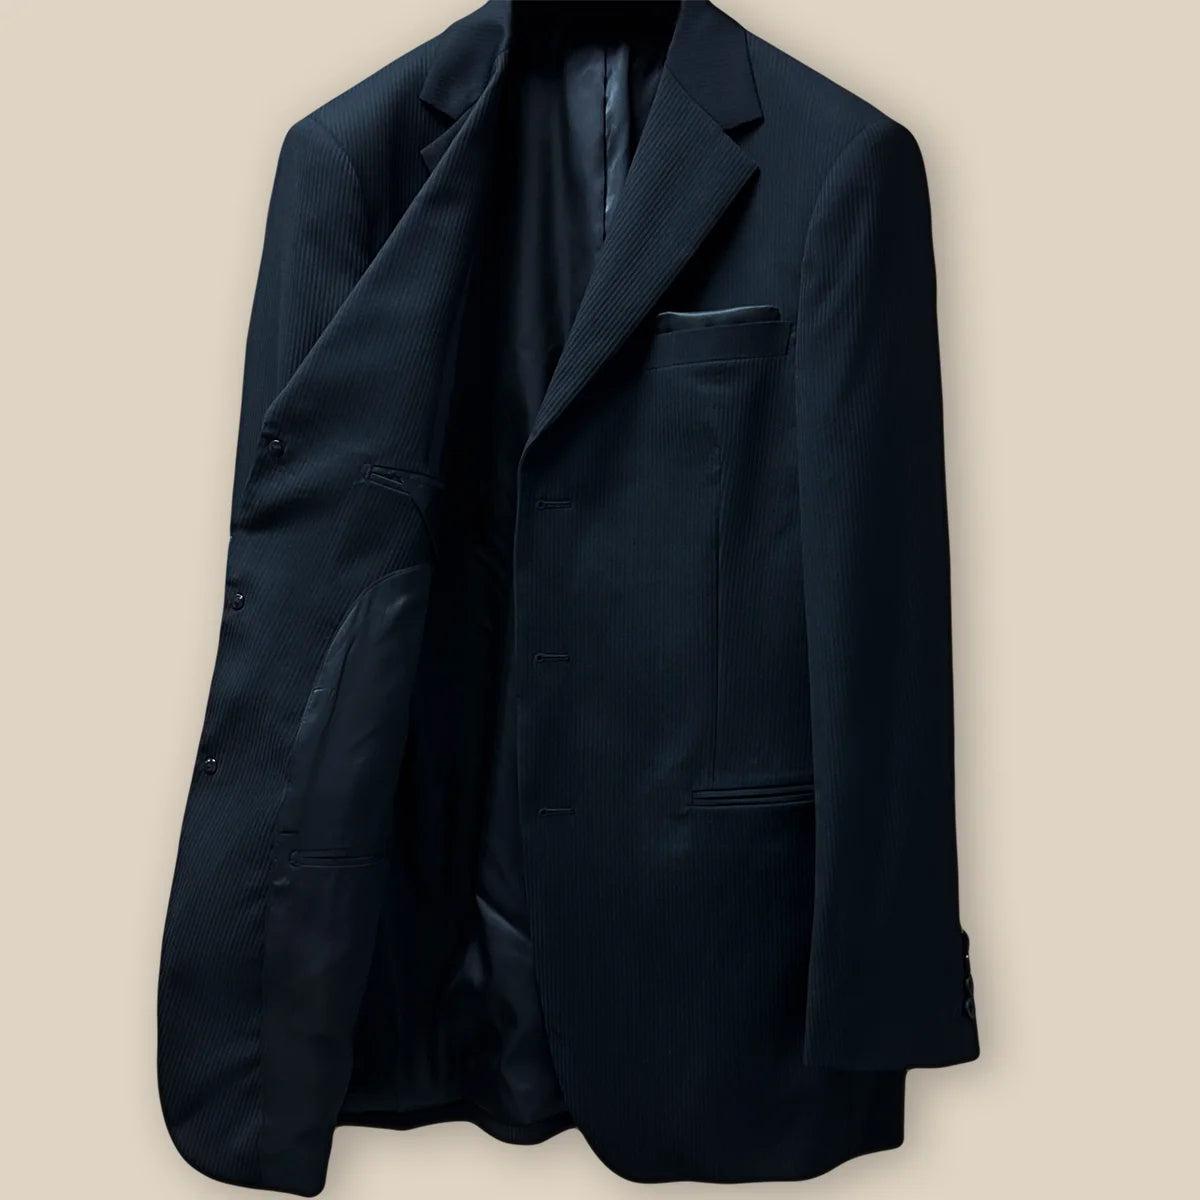 Inside view of the right side of the jacket, showing the black Bemberg lining and pocket details.